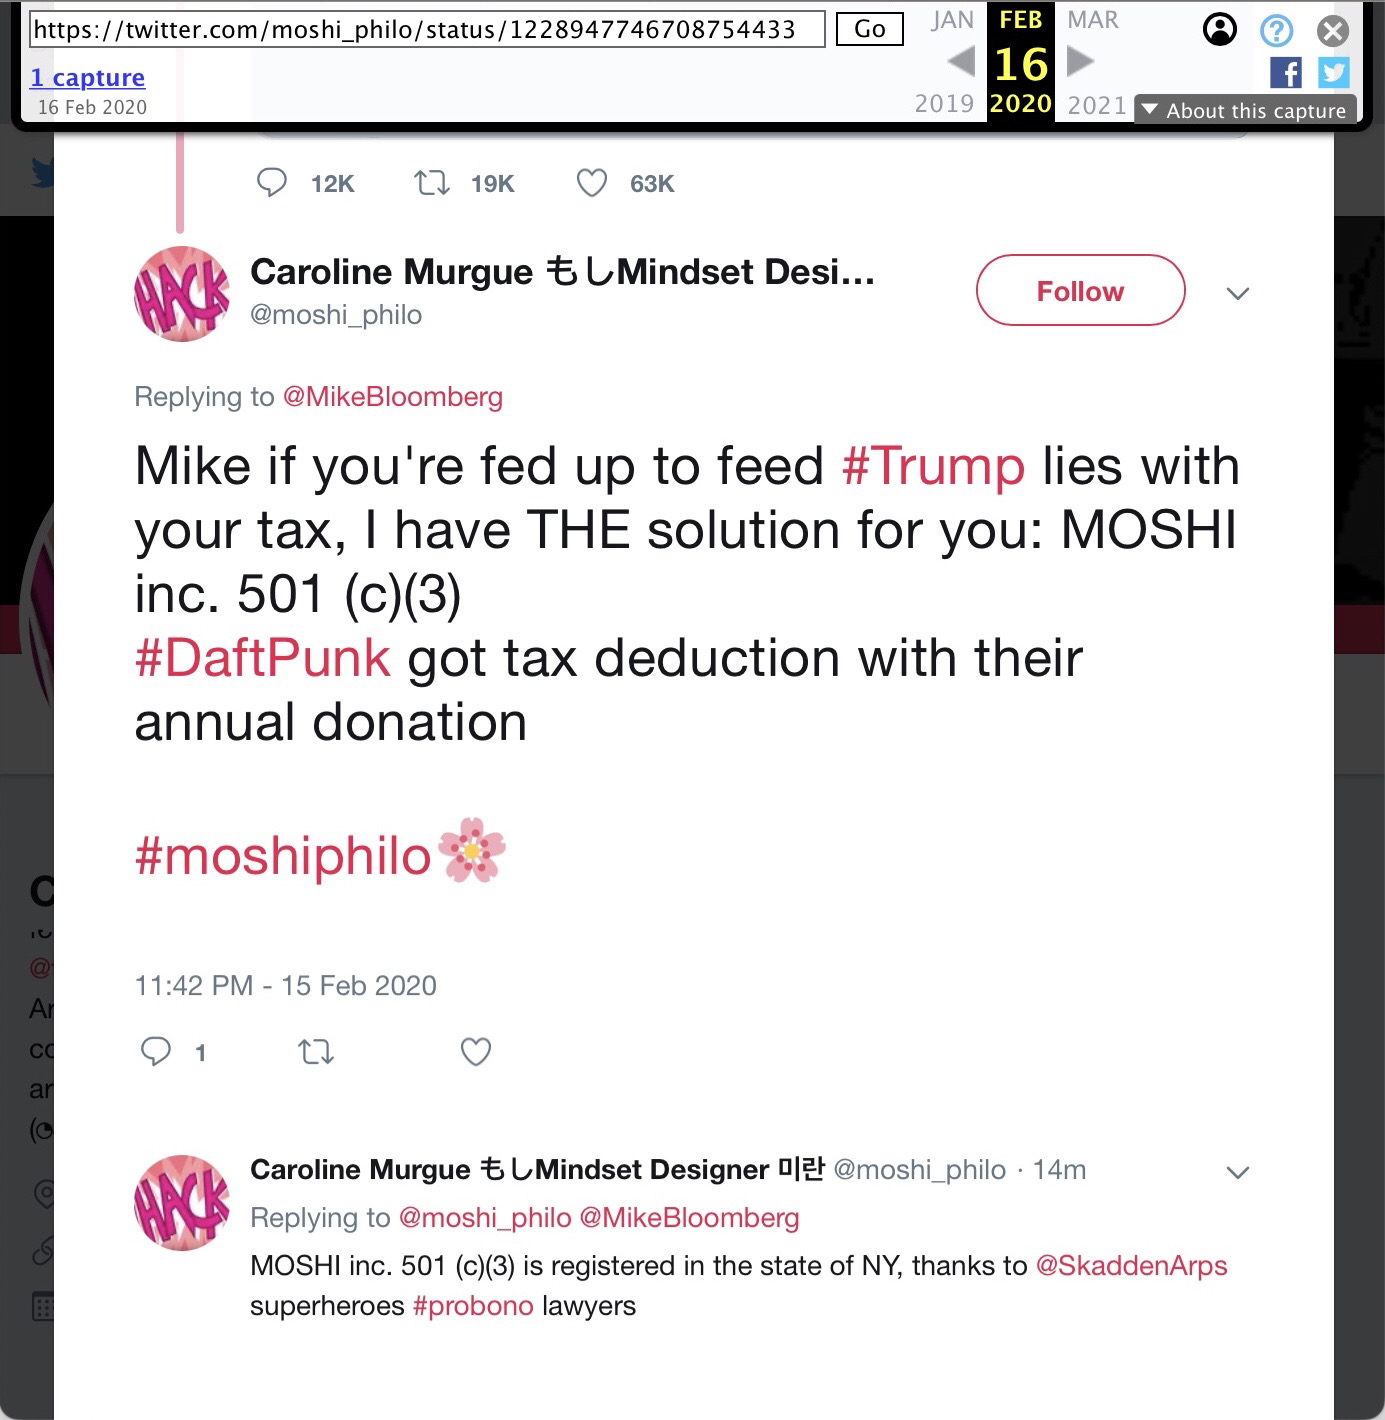 15 Feb 2020 tweet from @moshi_philo: Mike if you're fed up to feed #Trump lies with your tax, I have THE solution for you: Moshi Inc. 501 (c)(3) #DaftPunk got tax deduction with their annual donation #moshiphilo